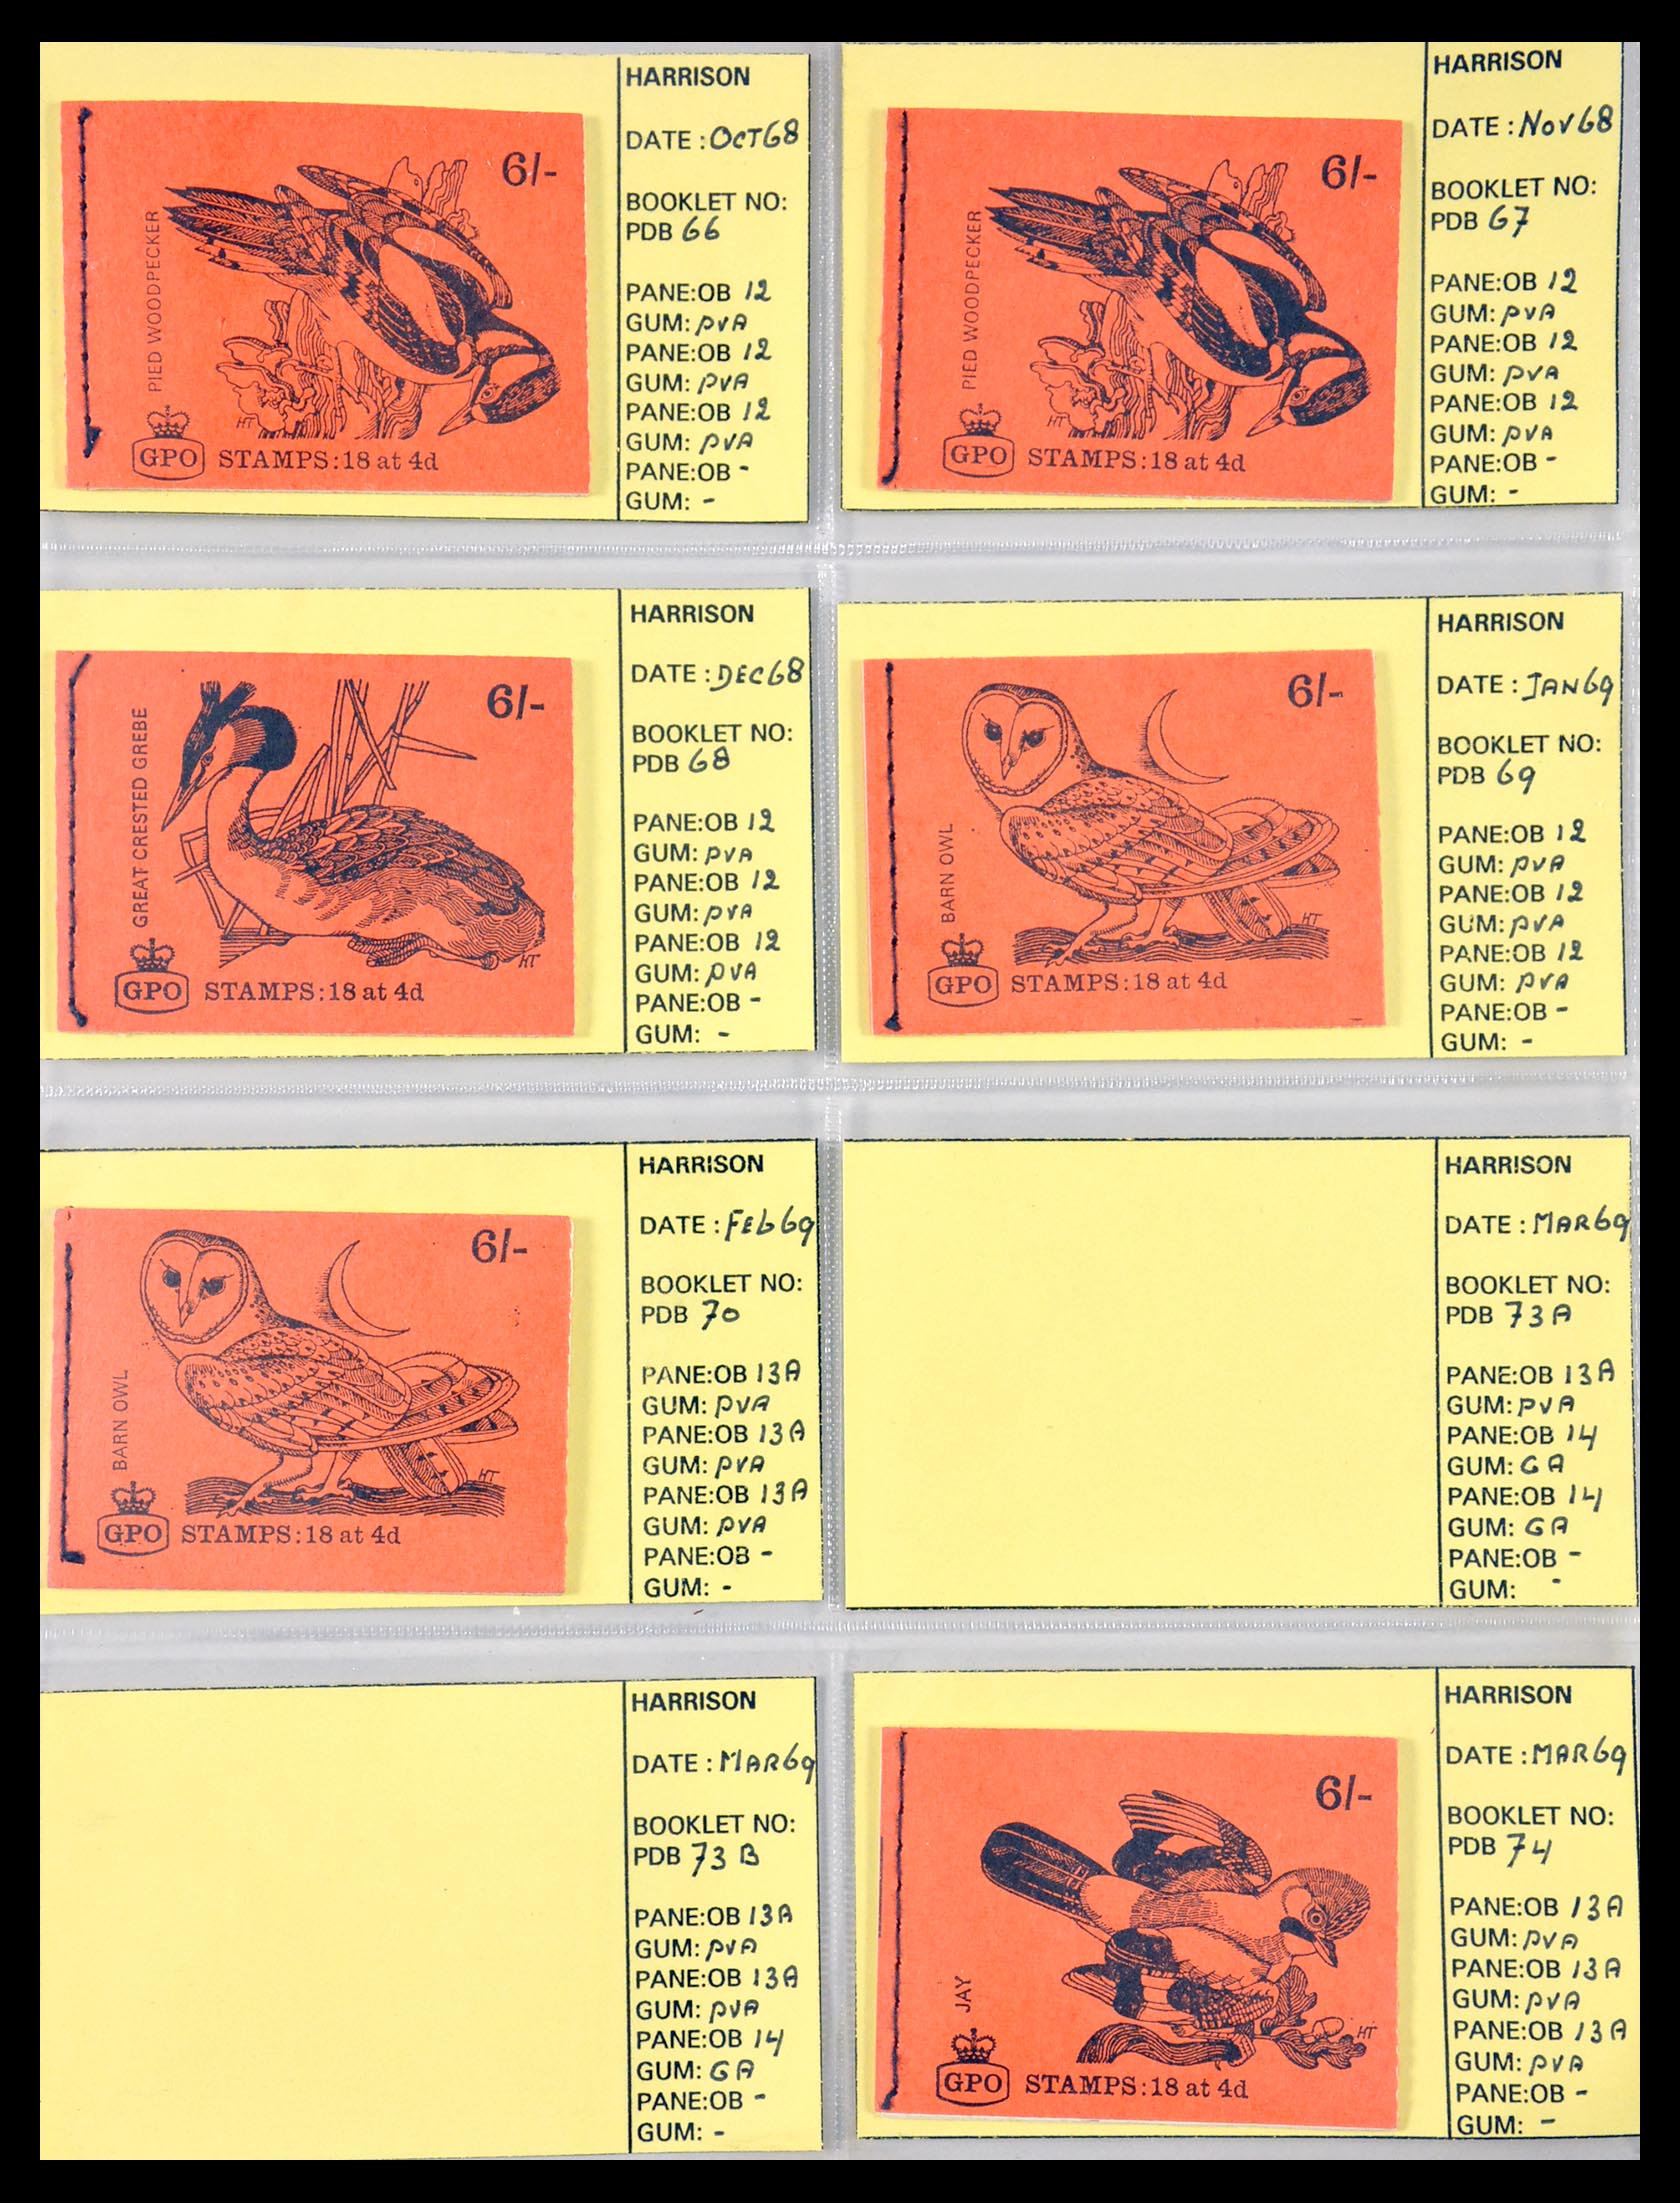 29755 006 - 29755 Great Britain stamp booklets 1968-1977.